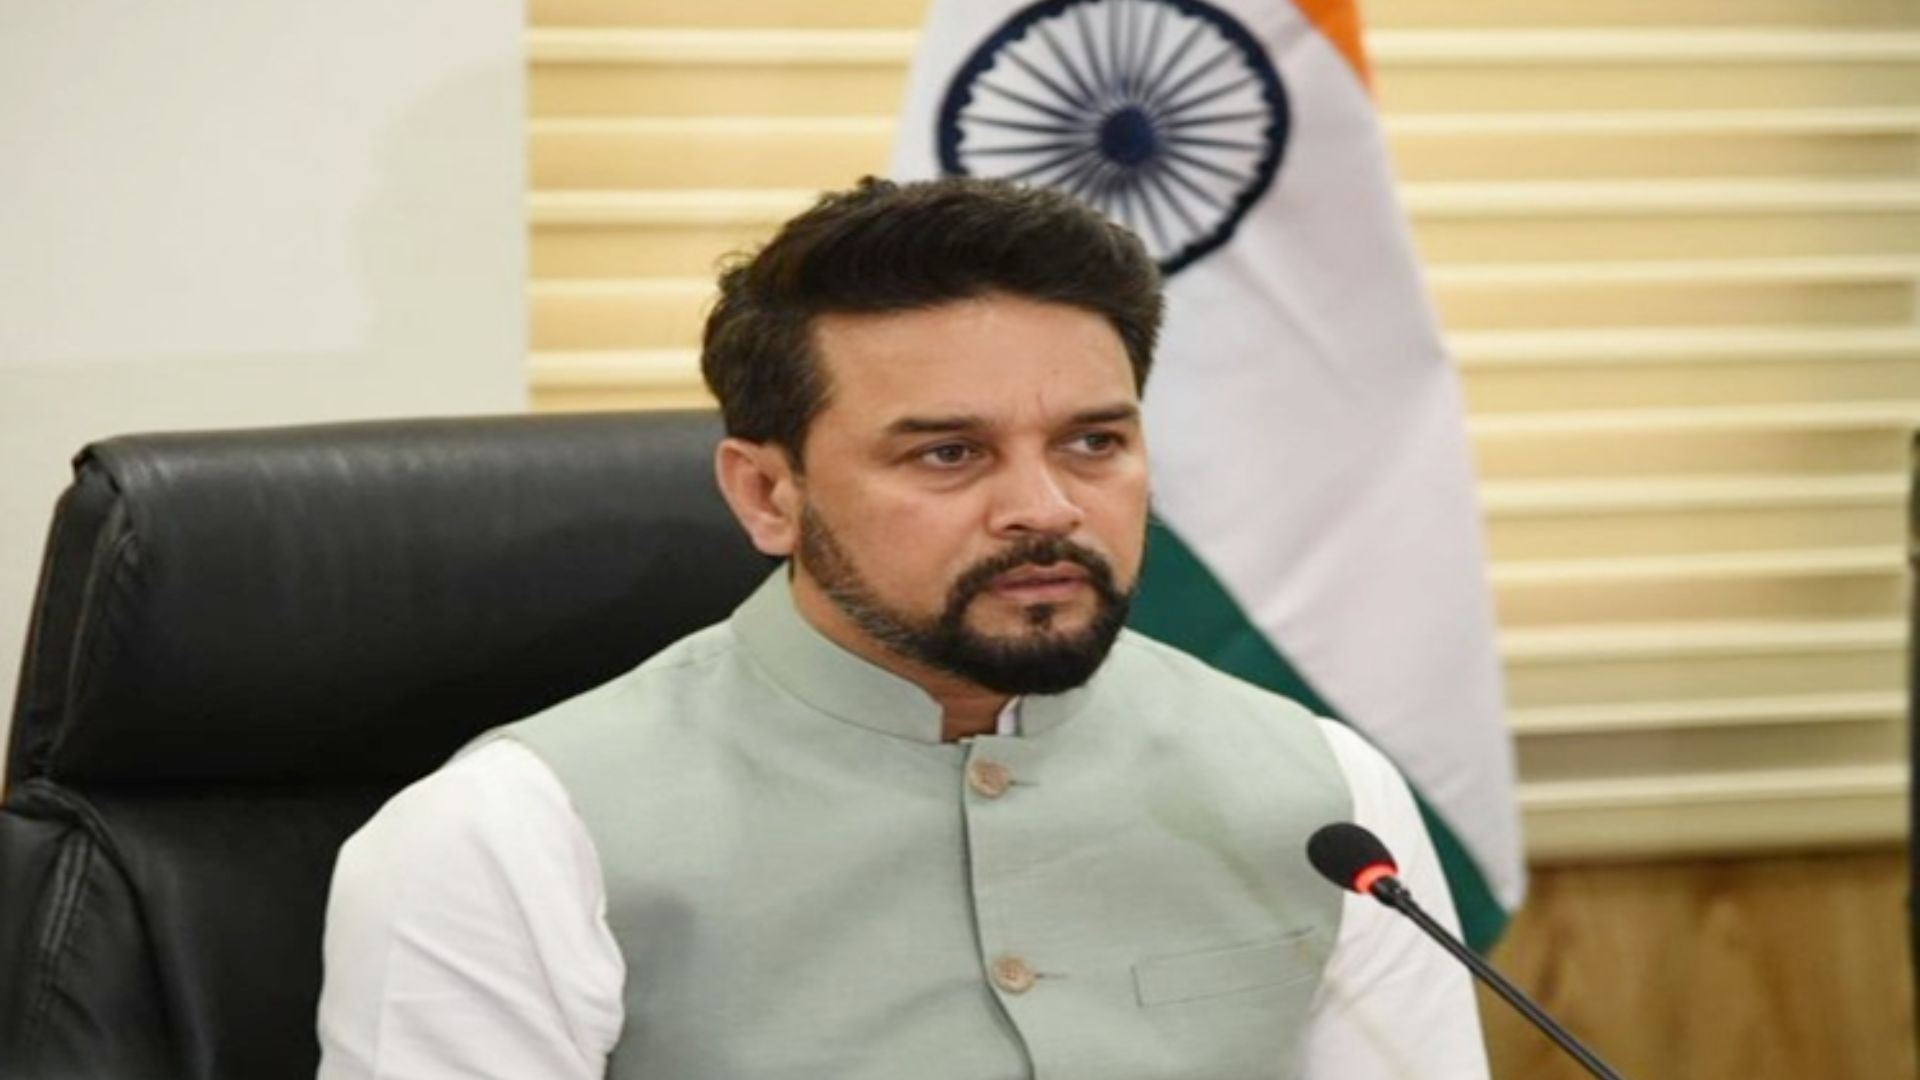 Centre approved 340 sports infrastructure projects across India worth Rs 3566.68 cr: Anurag Thakur